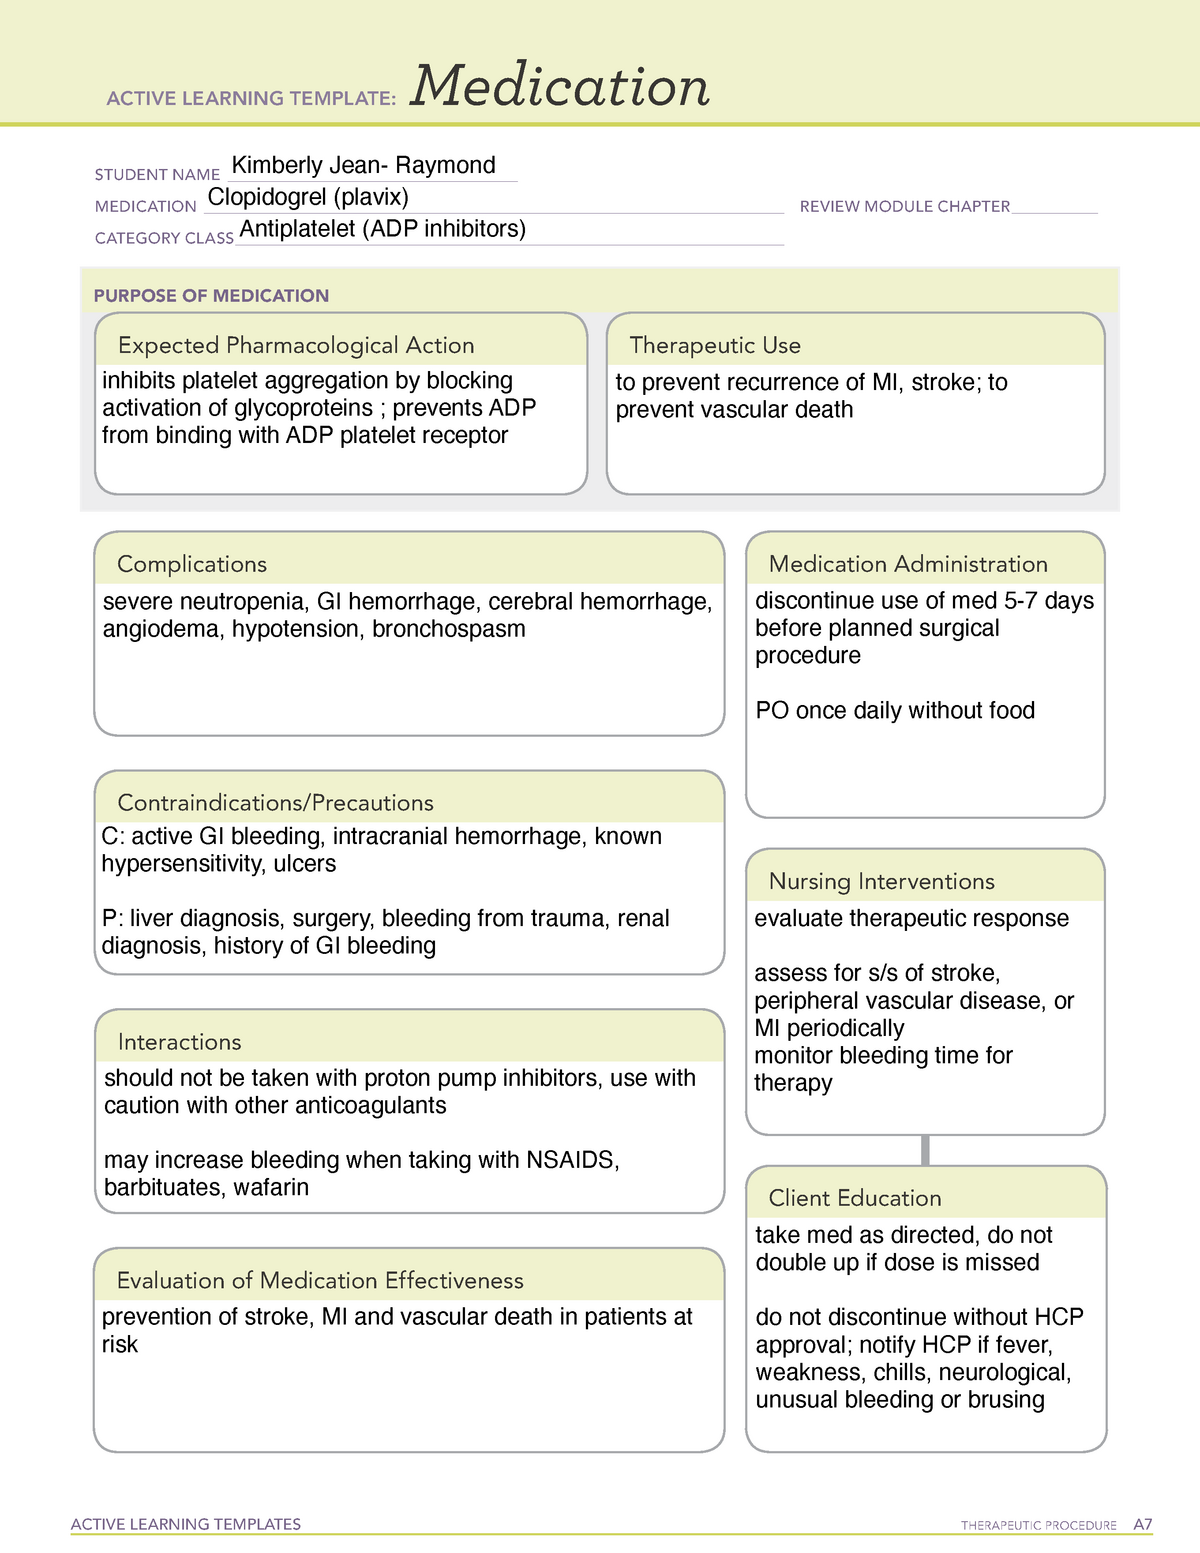 Clopidogrel CV Medication ACTIVE LEARNING TEMPLATES THERAPEUTIC